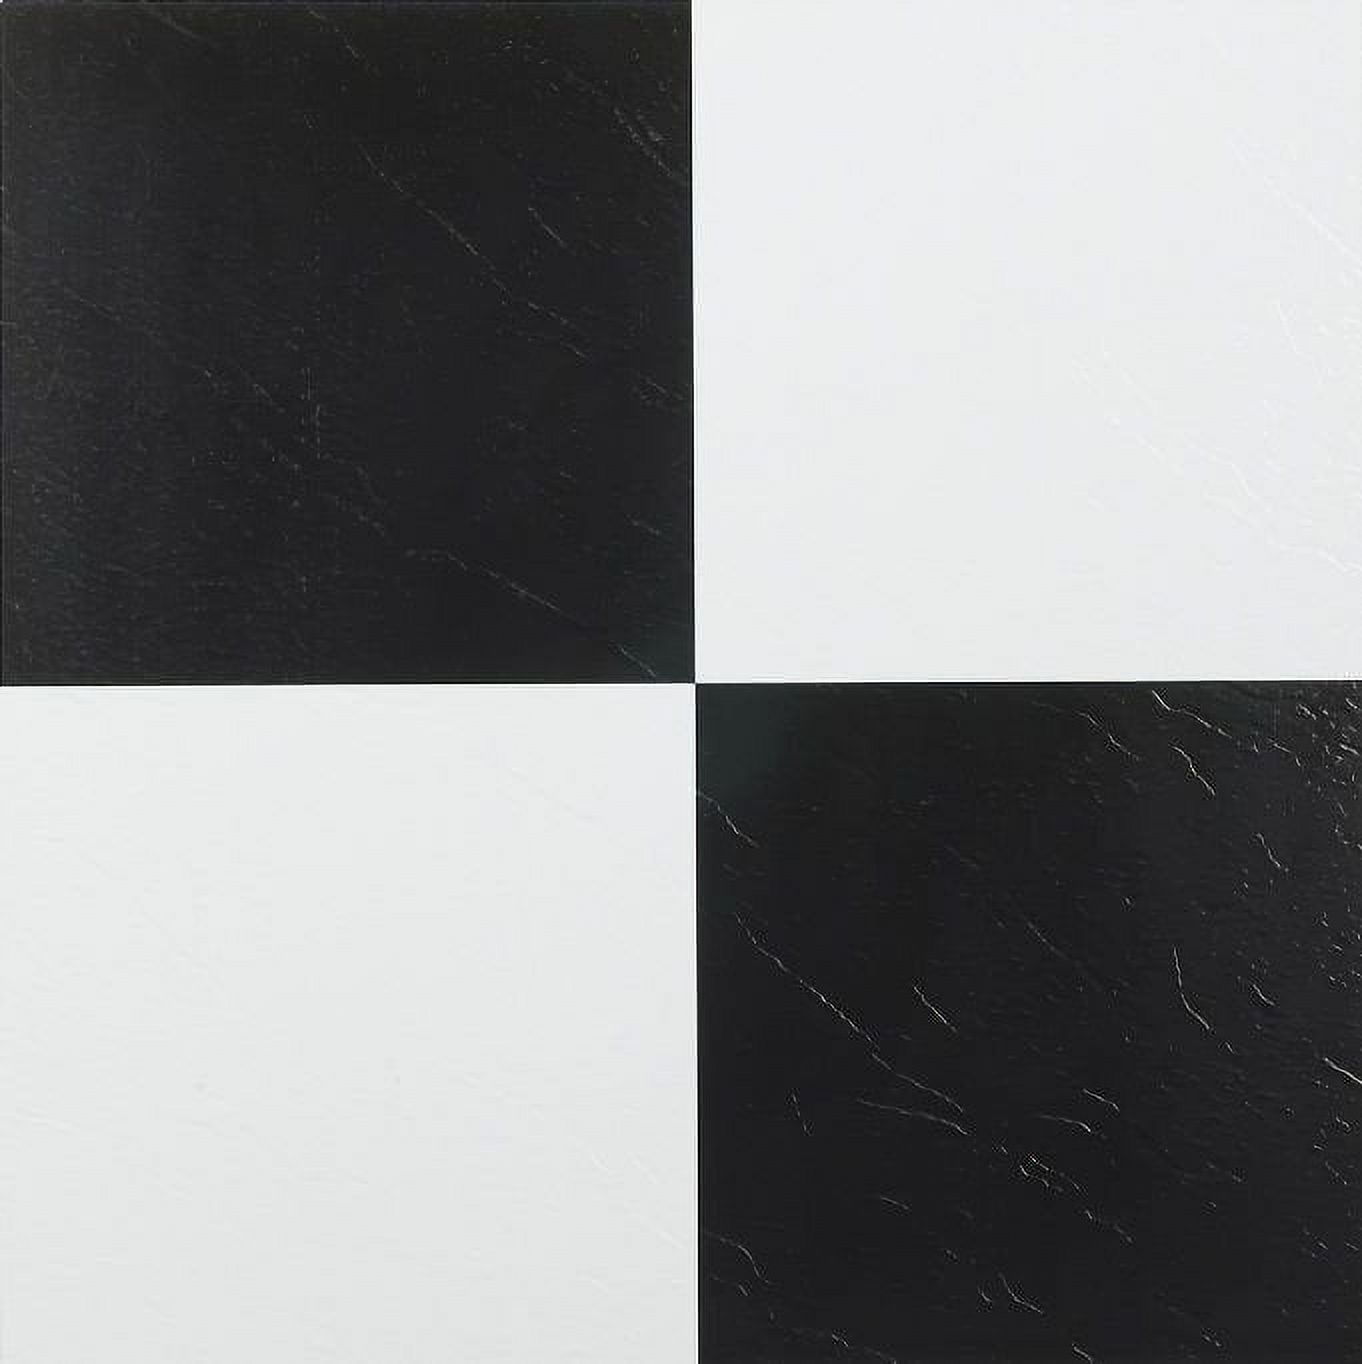 Black & White Checkered Vinyl Floor Tiles Adhesive Stick and Peel 12'' x 12'' 4-Pack (80 Pieces) - image 1 of 2